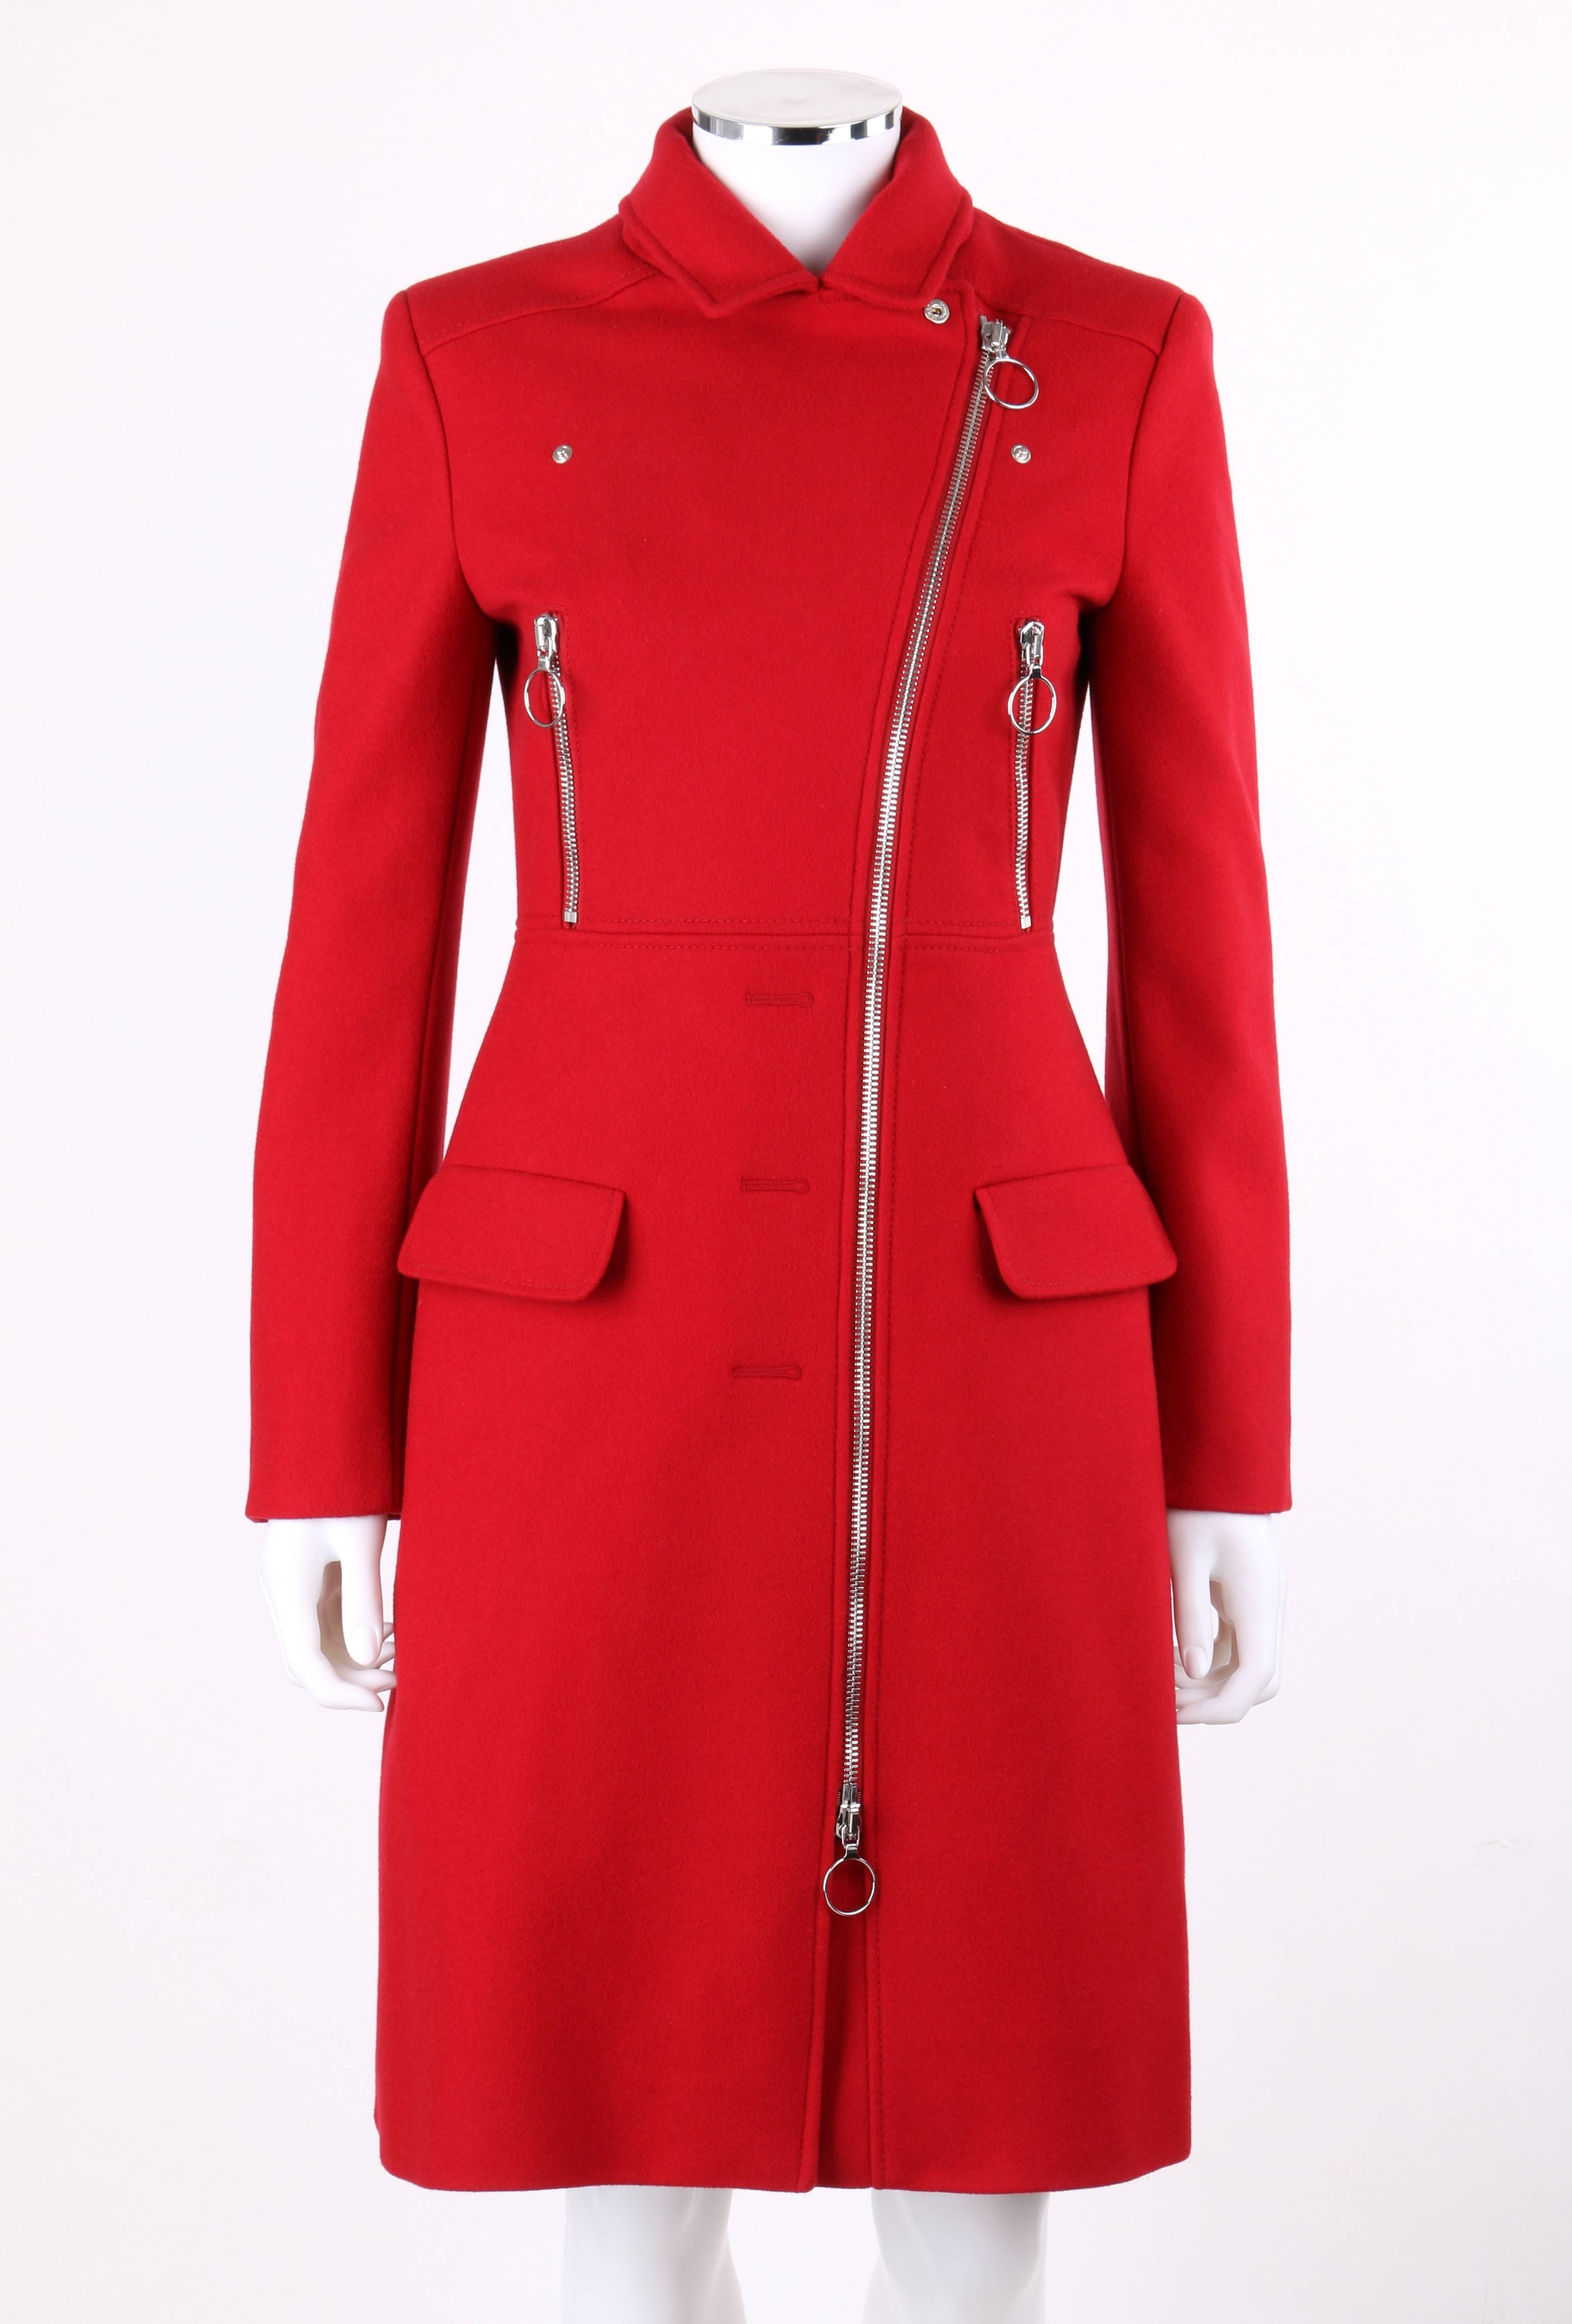 Moschino Cheap & Chic red wool side zip motorcycle car-length coat; New with tags. Notched lapel collar coat with silver-toned snap closures at lapels. Side two-way zipper closure with ring zipper pulls. Three faux buttonholes at side front. Two